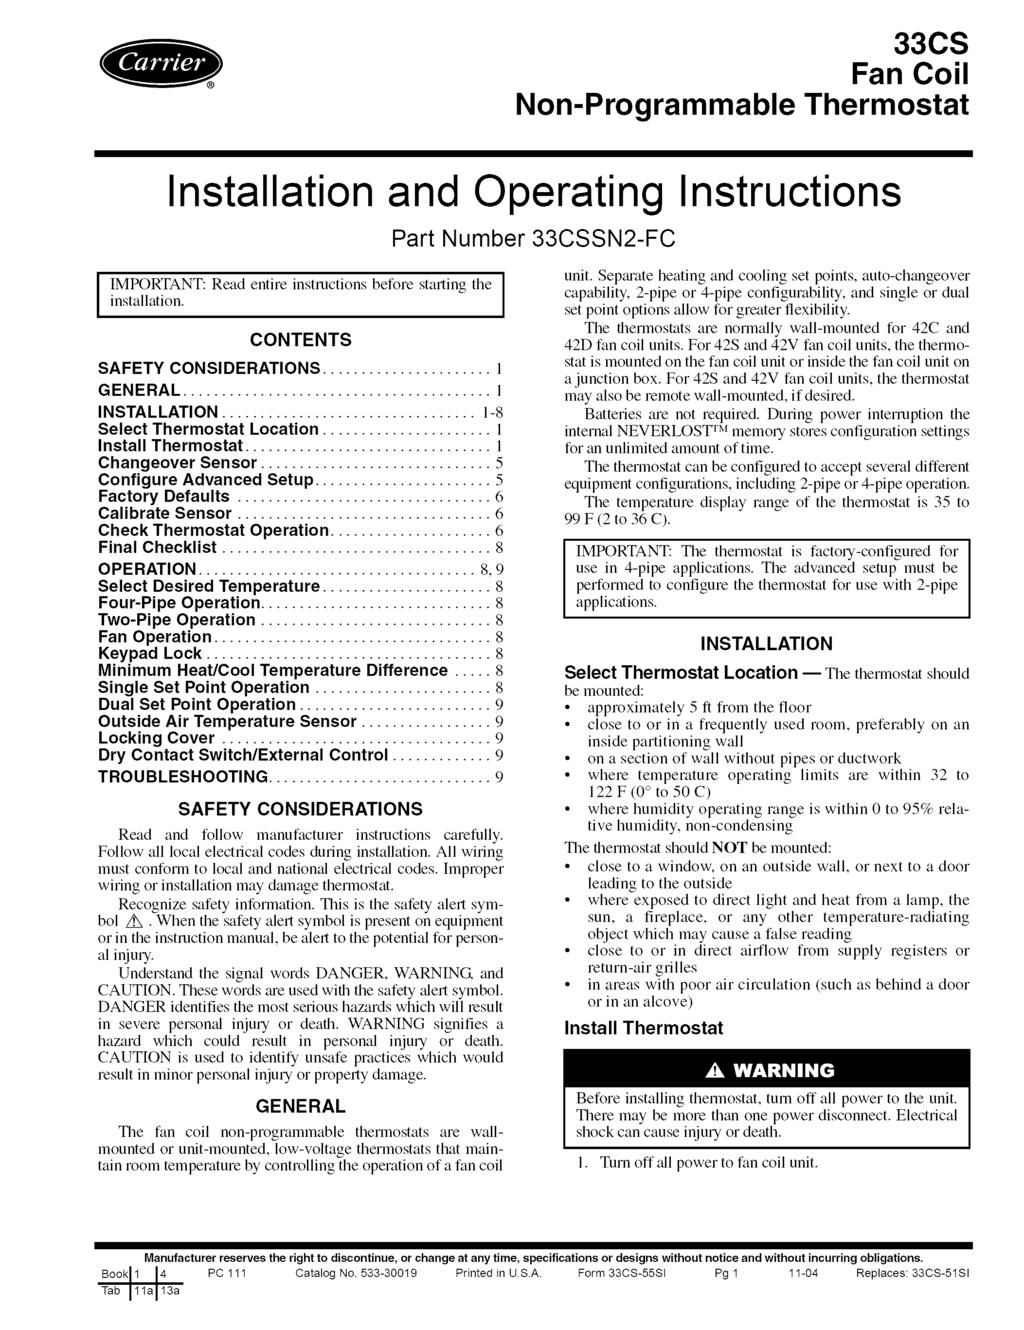 Non-Programmable 33CS Fan Coil Thermostat Installation and Operating Instructions Part Number 33CSSN2-FC IMPORTANT: installation.